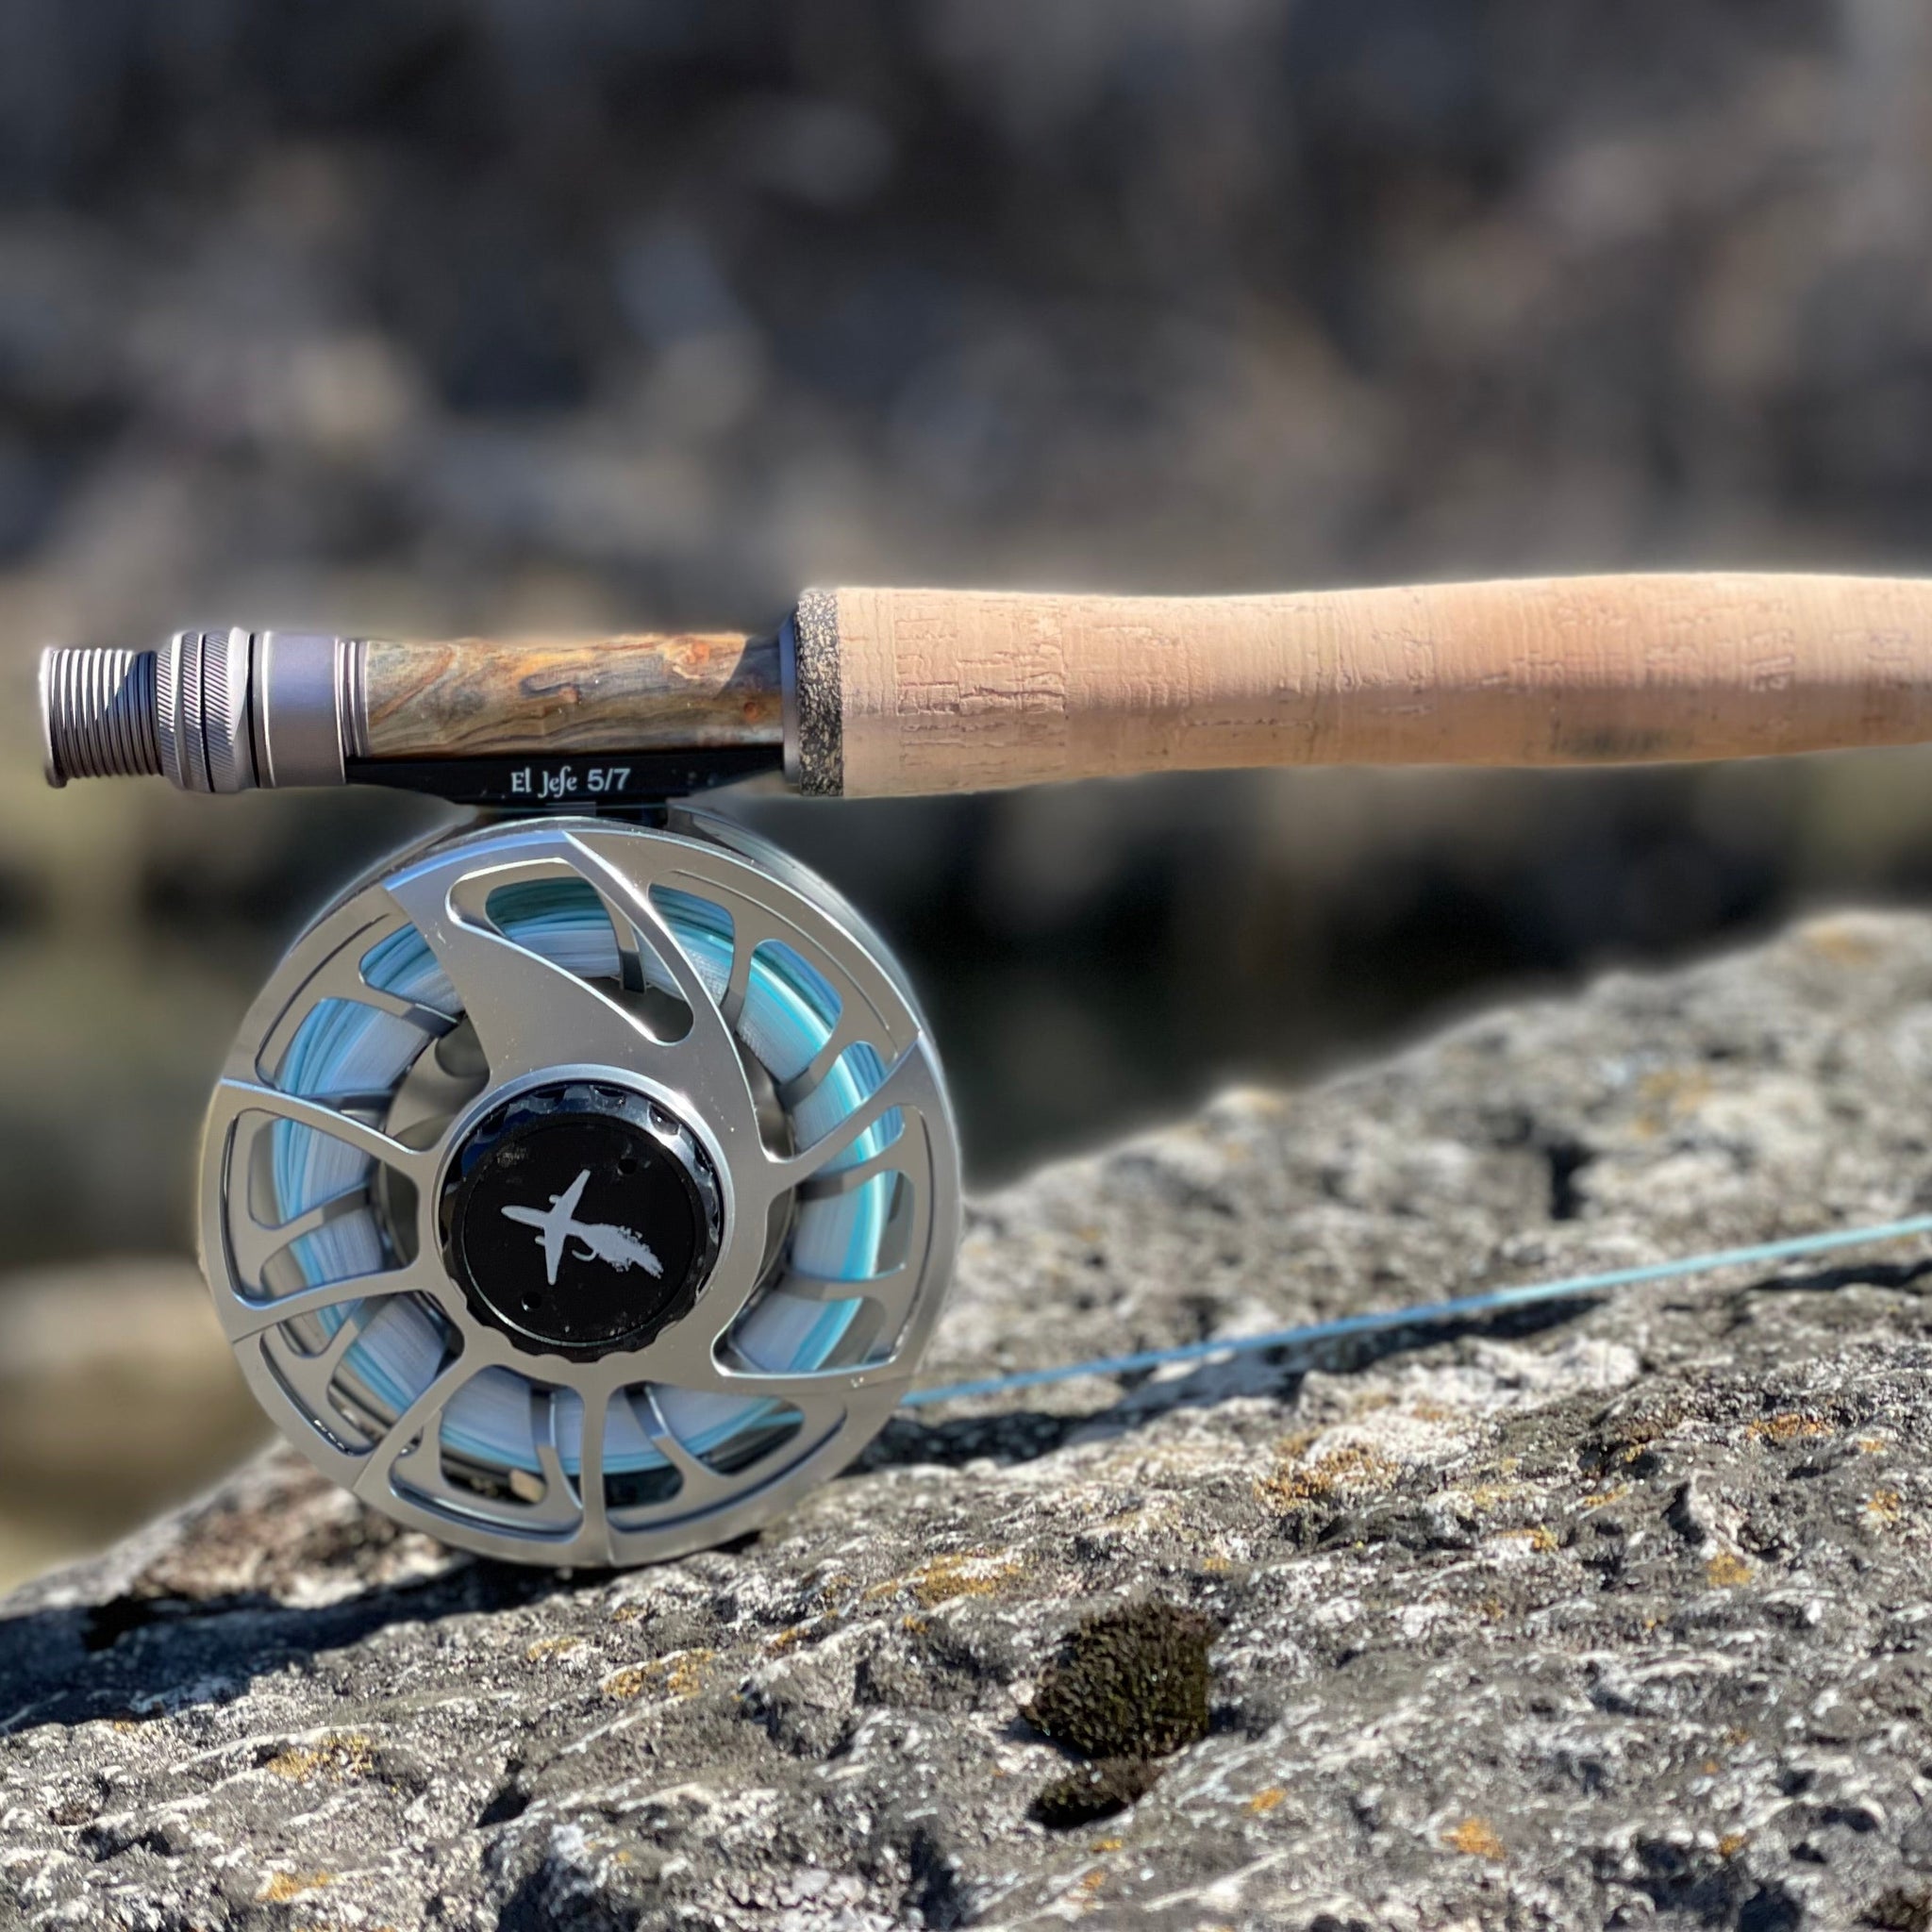 El Jefe Fly Fishing Combo Package | 804-3 | 8' Four Section 3 Weight Fly  Rod And Reel Outfit